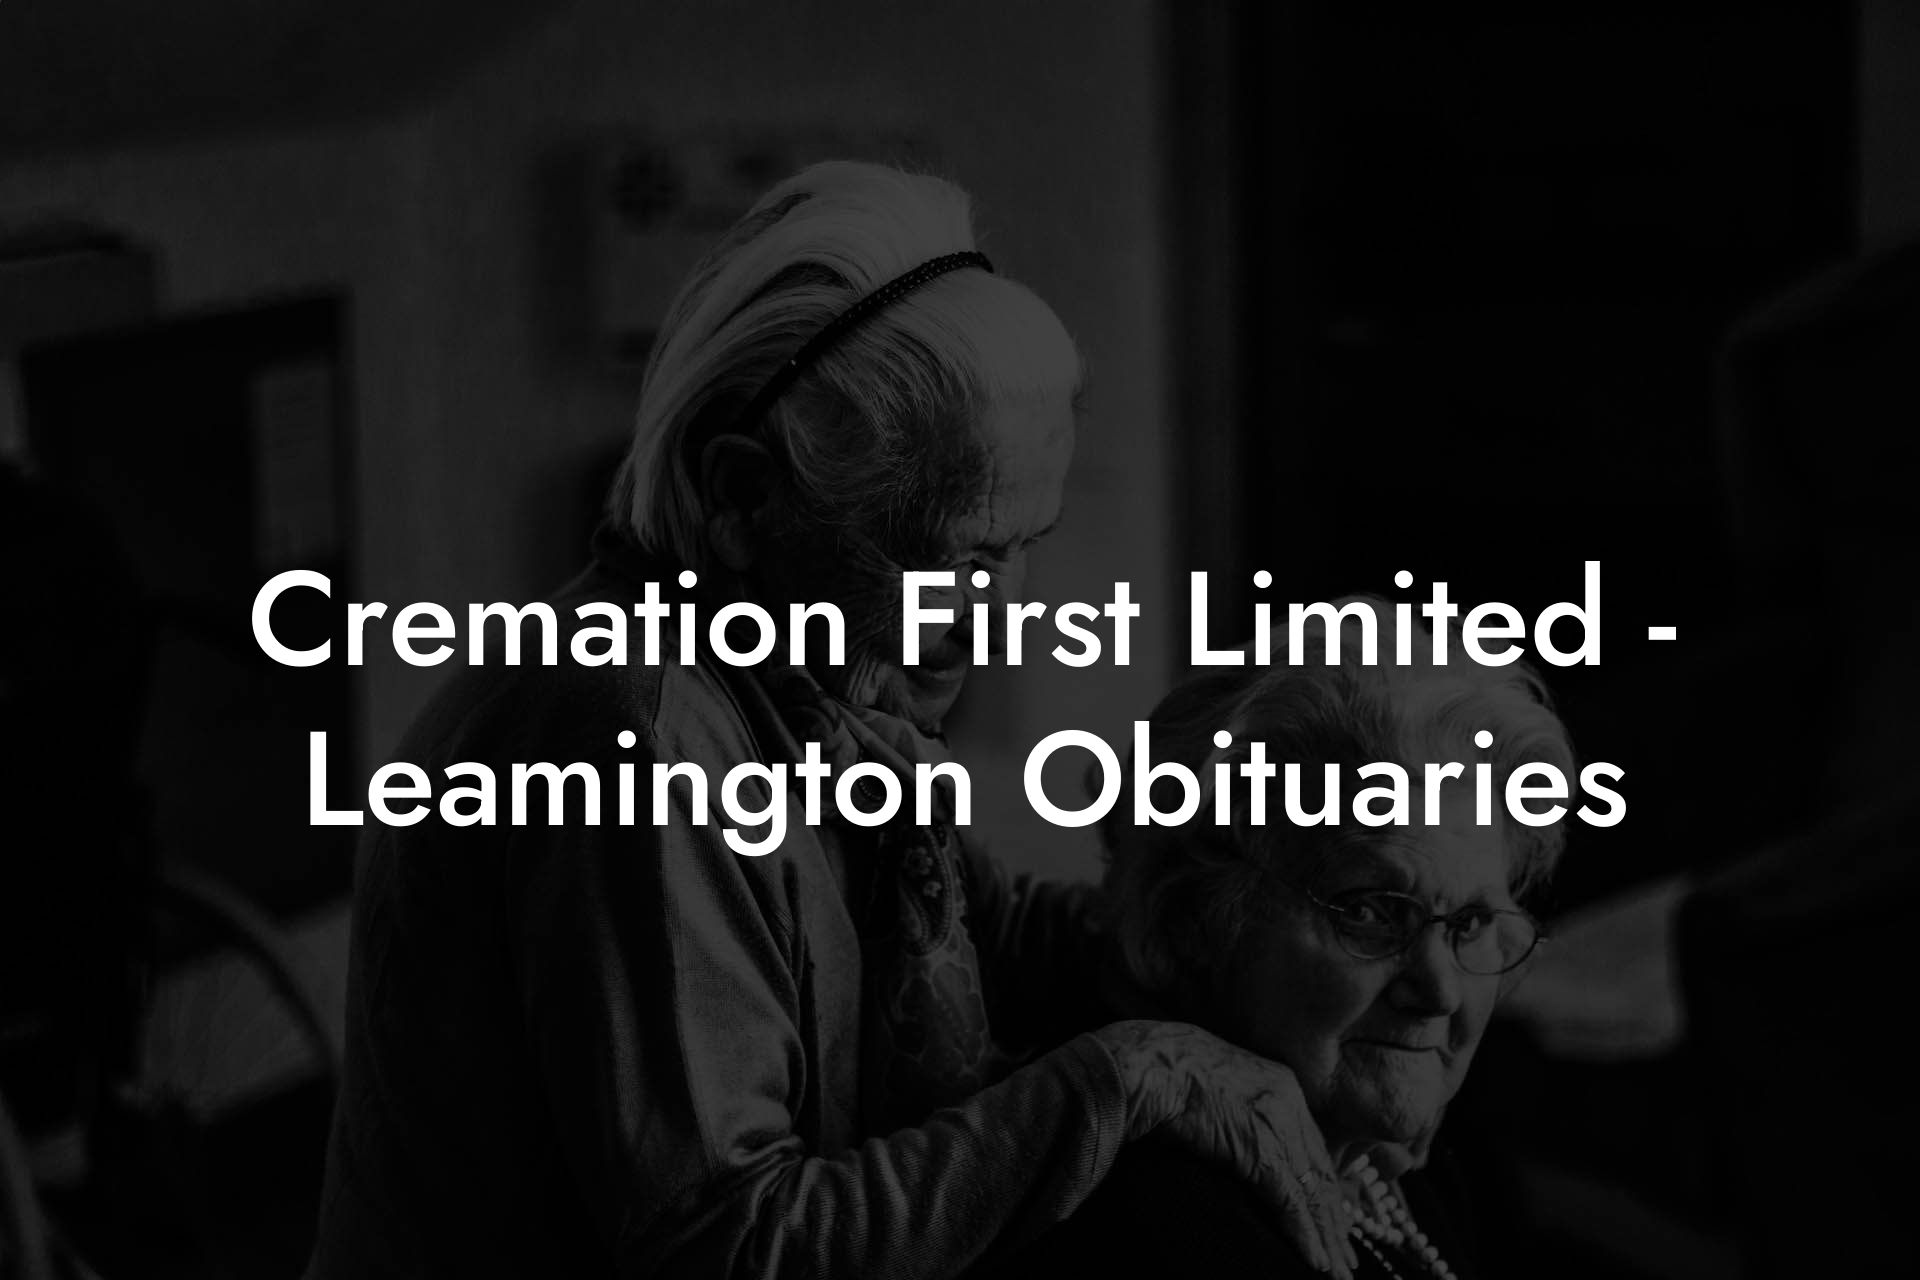 Cremation First Limited - Leamington Obituaries